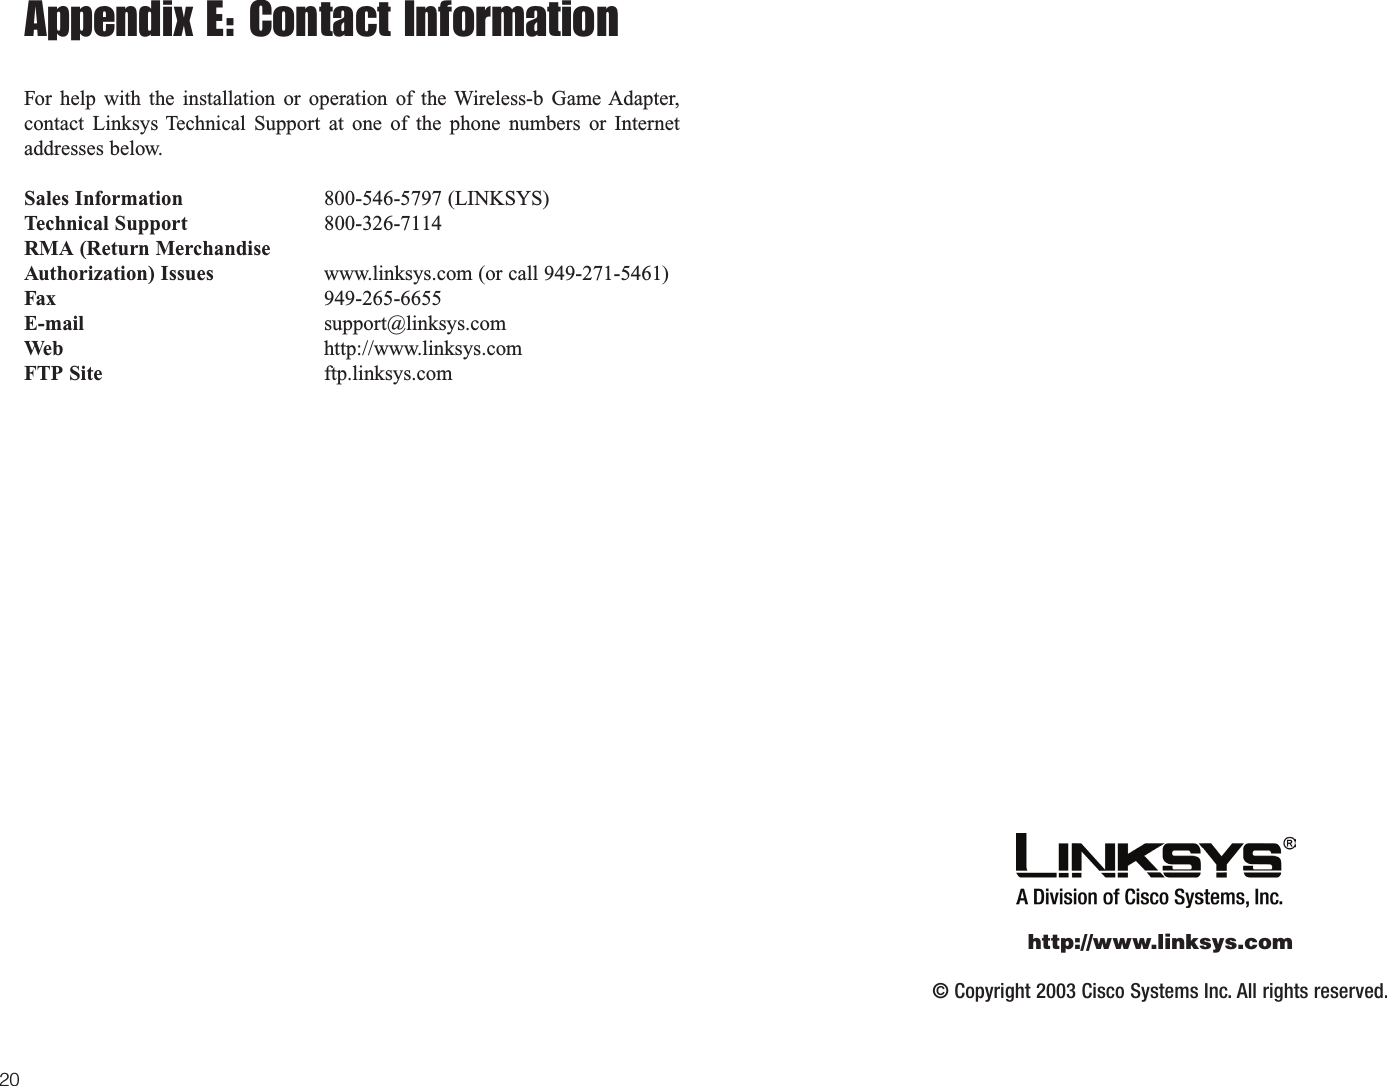 Appendix E: Contact InformationFor help with the installation or operation of the Wireless-b Game Adapter,contact Linksys Technical Support at one of the phone numbers or Internetaddresses below.Sales Information 800-546-5797 (LINKSYS)Technical Support 800-326-7114RMA (Return MerchandiseAuthorization) Issues www.linksys.com (or call 949-271-5461)Fax 949-265-6655E-mail support@linksys.comWeb http://www.linksys.comFTP Site ftp.linksys.com20© Copyright 2003 Cisco Systems Inc. All rights reserved.http://www.linksys.com